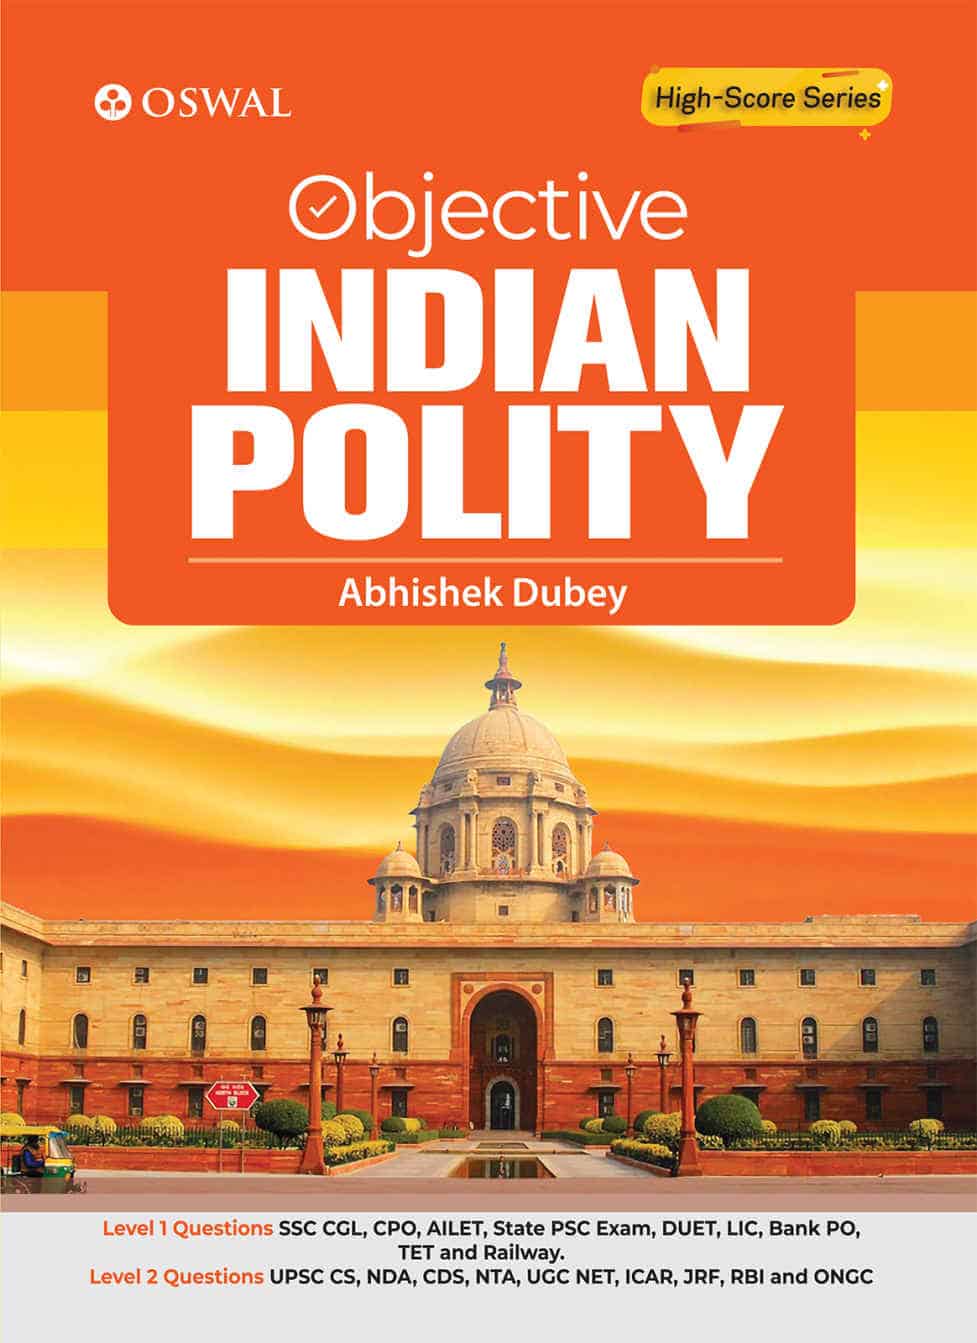 Objective Indian Polity by Abhisekh Dubey - Oswaal